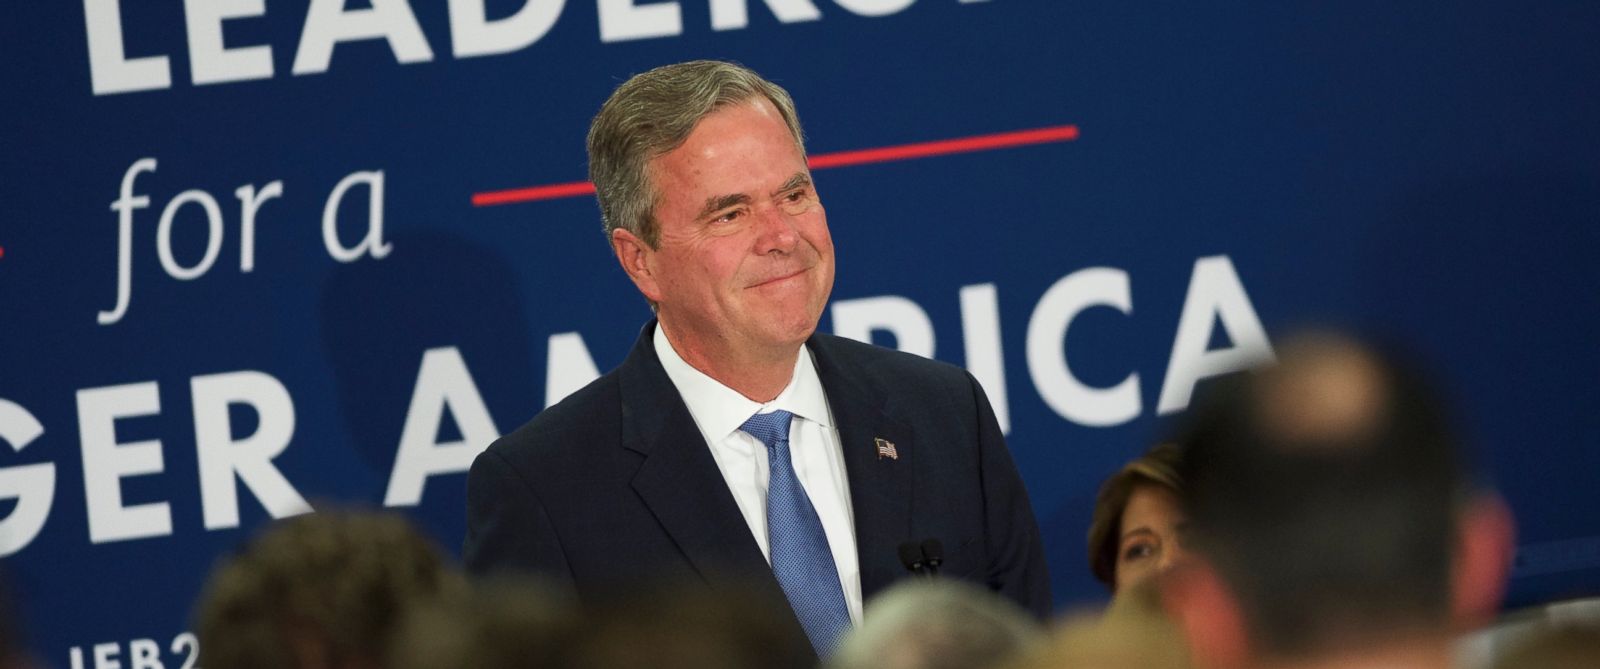 PHOTO: Jeb Bush reacts as he announces the suspension of his presidential campaign at an election night party at the Hilton Columbia Center in Columbia, S.C., Feb. 20, 2016. 